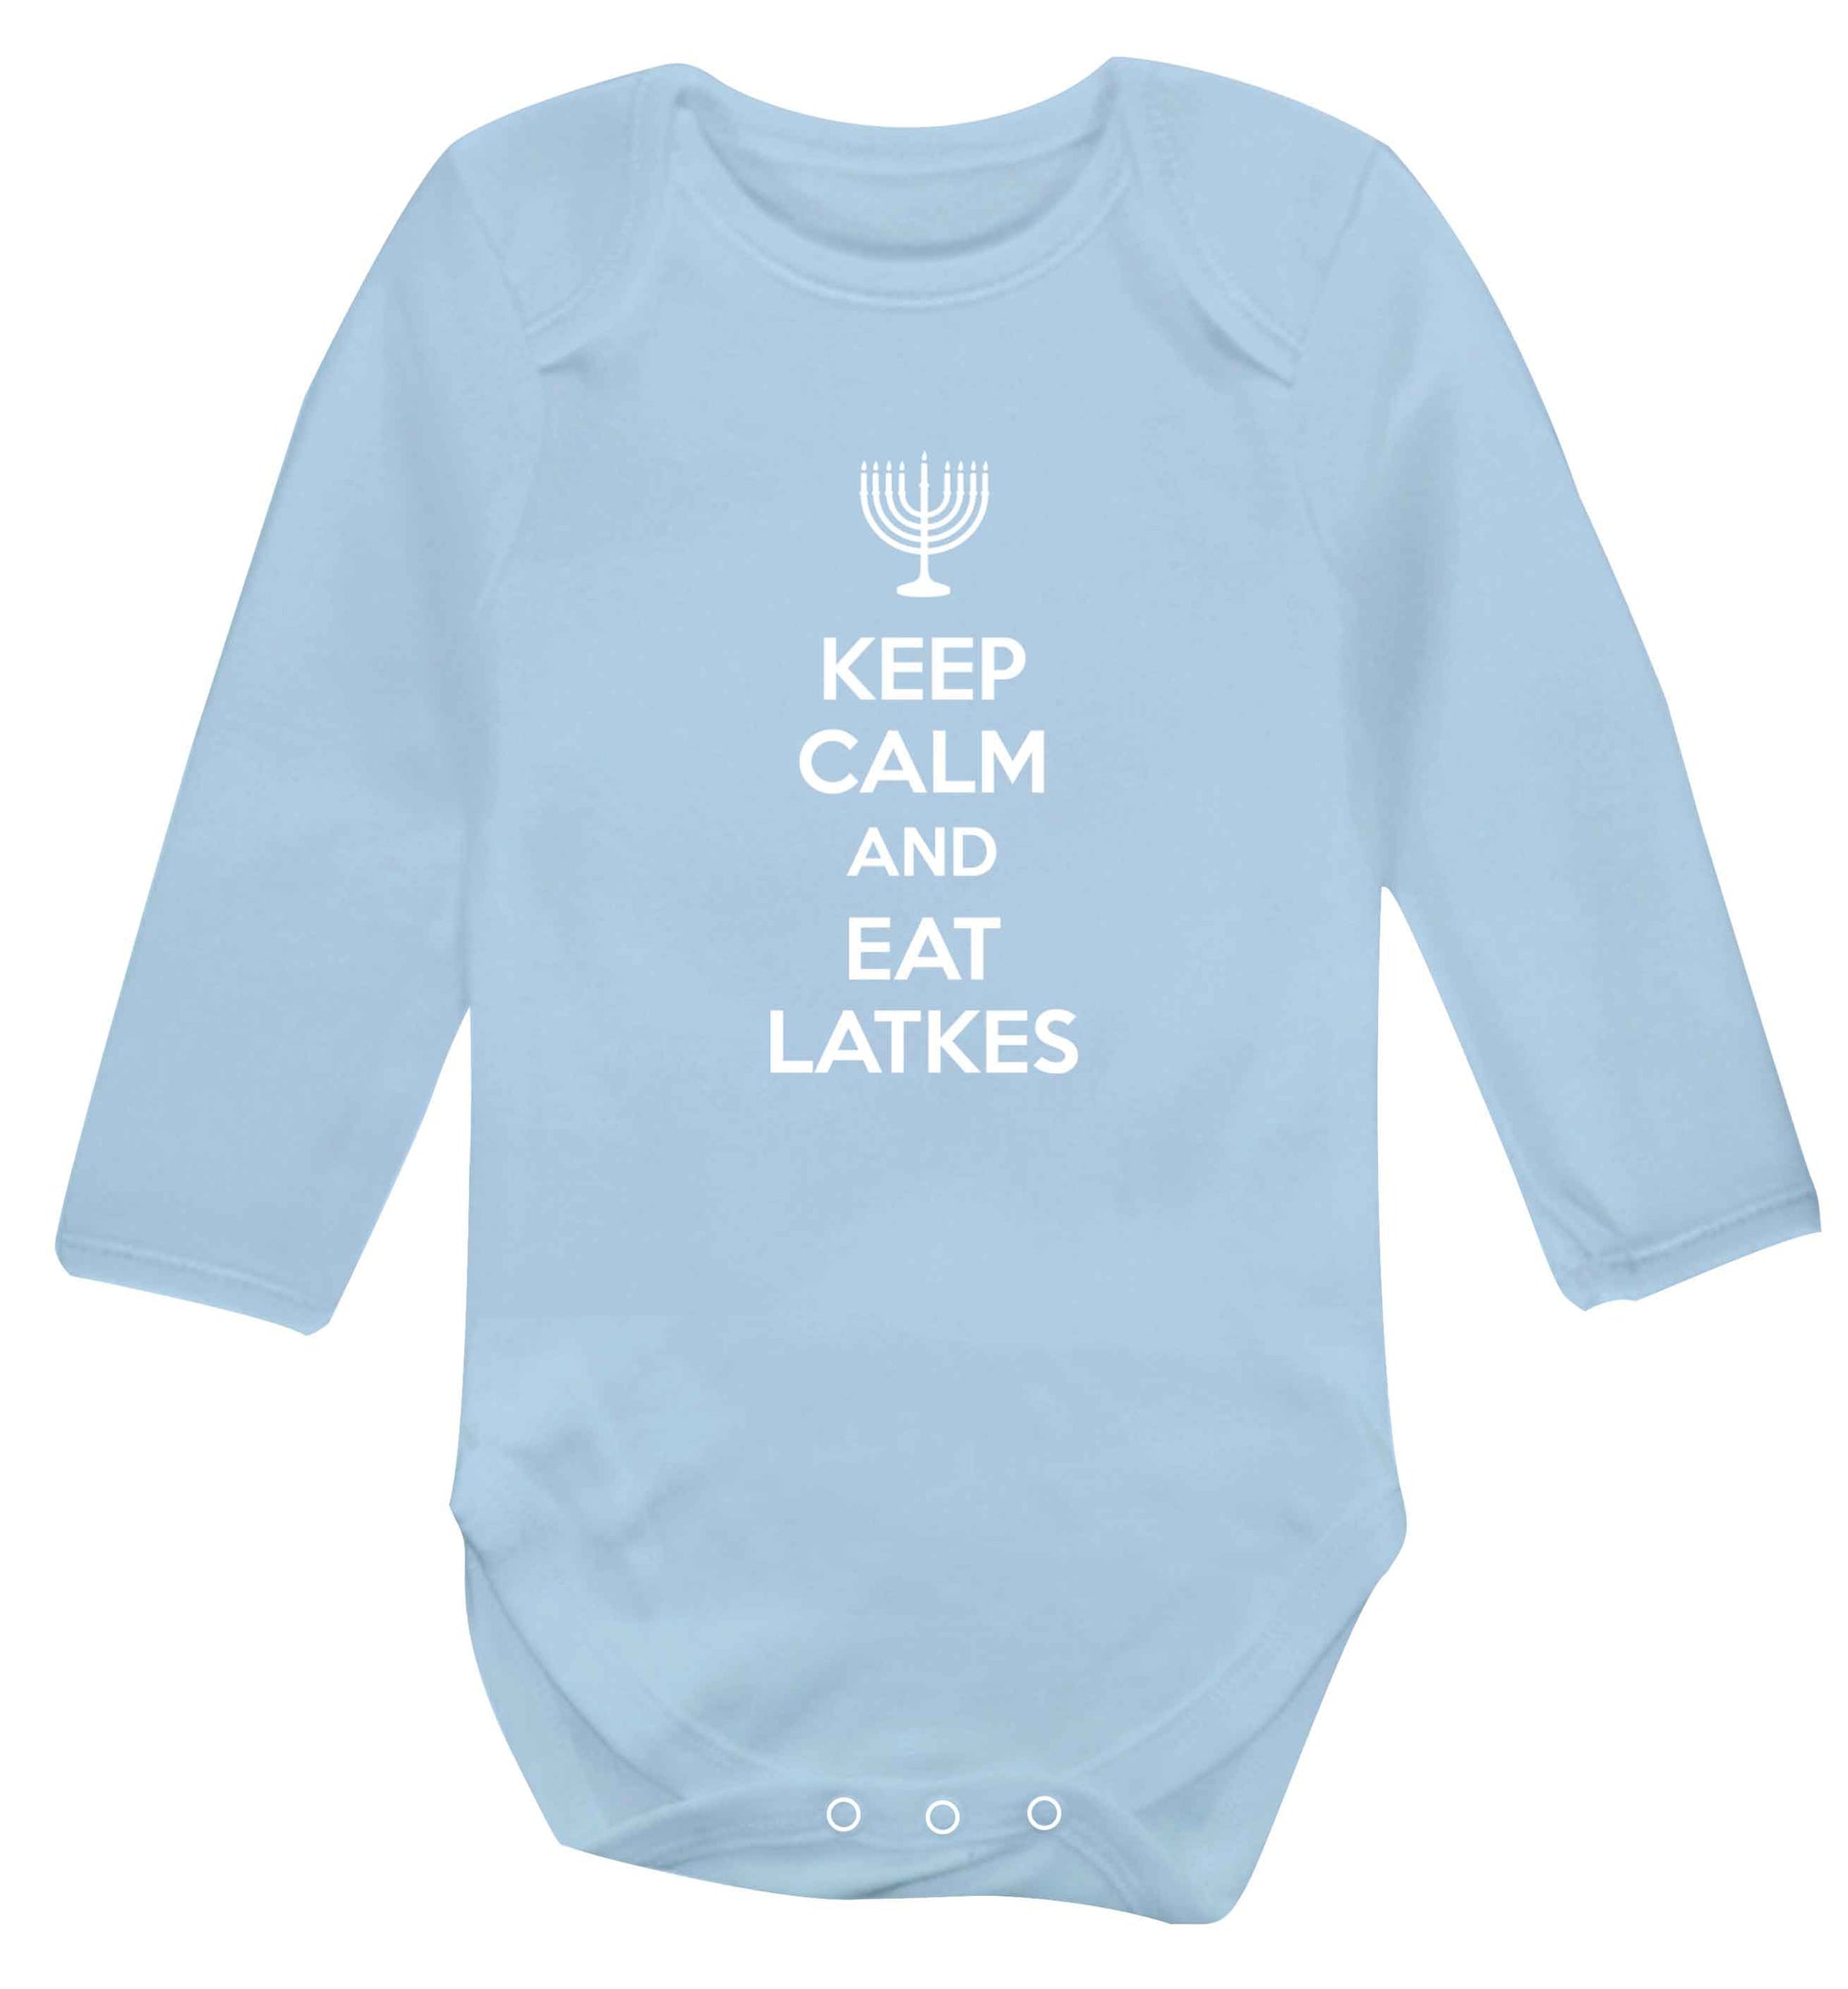 Keep calm and eat latkes baby vest long sleeved pale blue 6-12 months